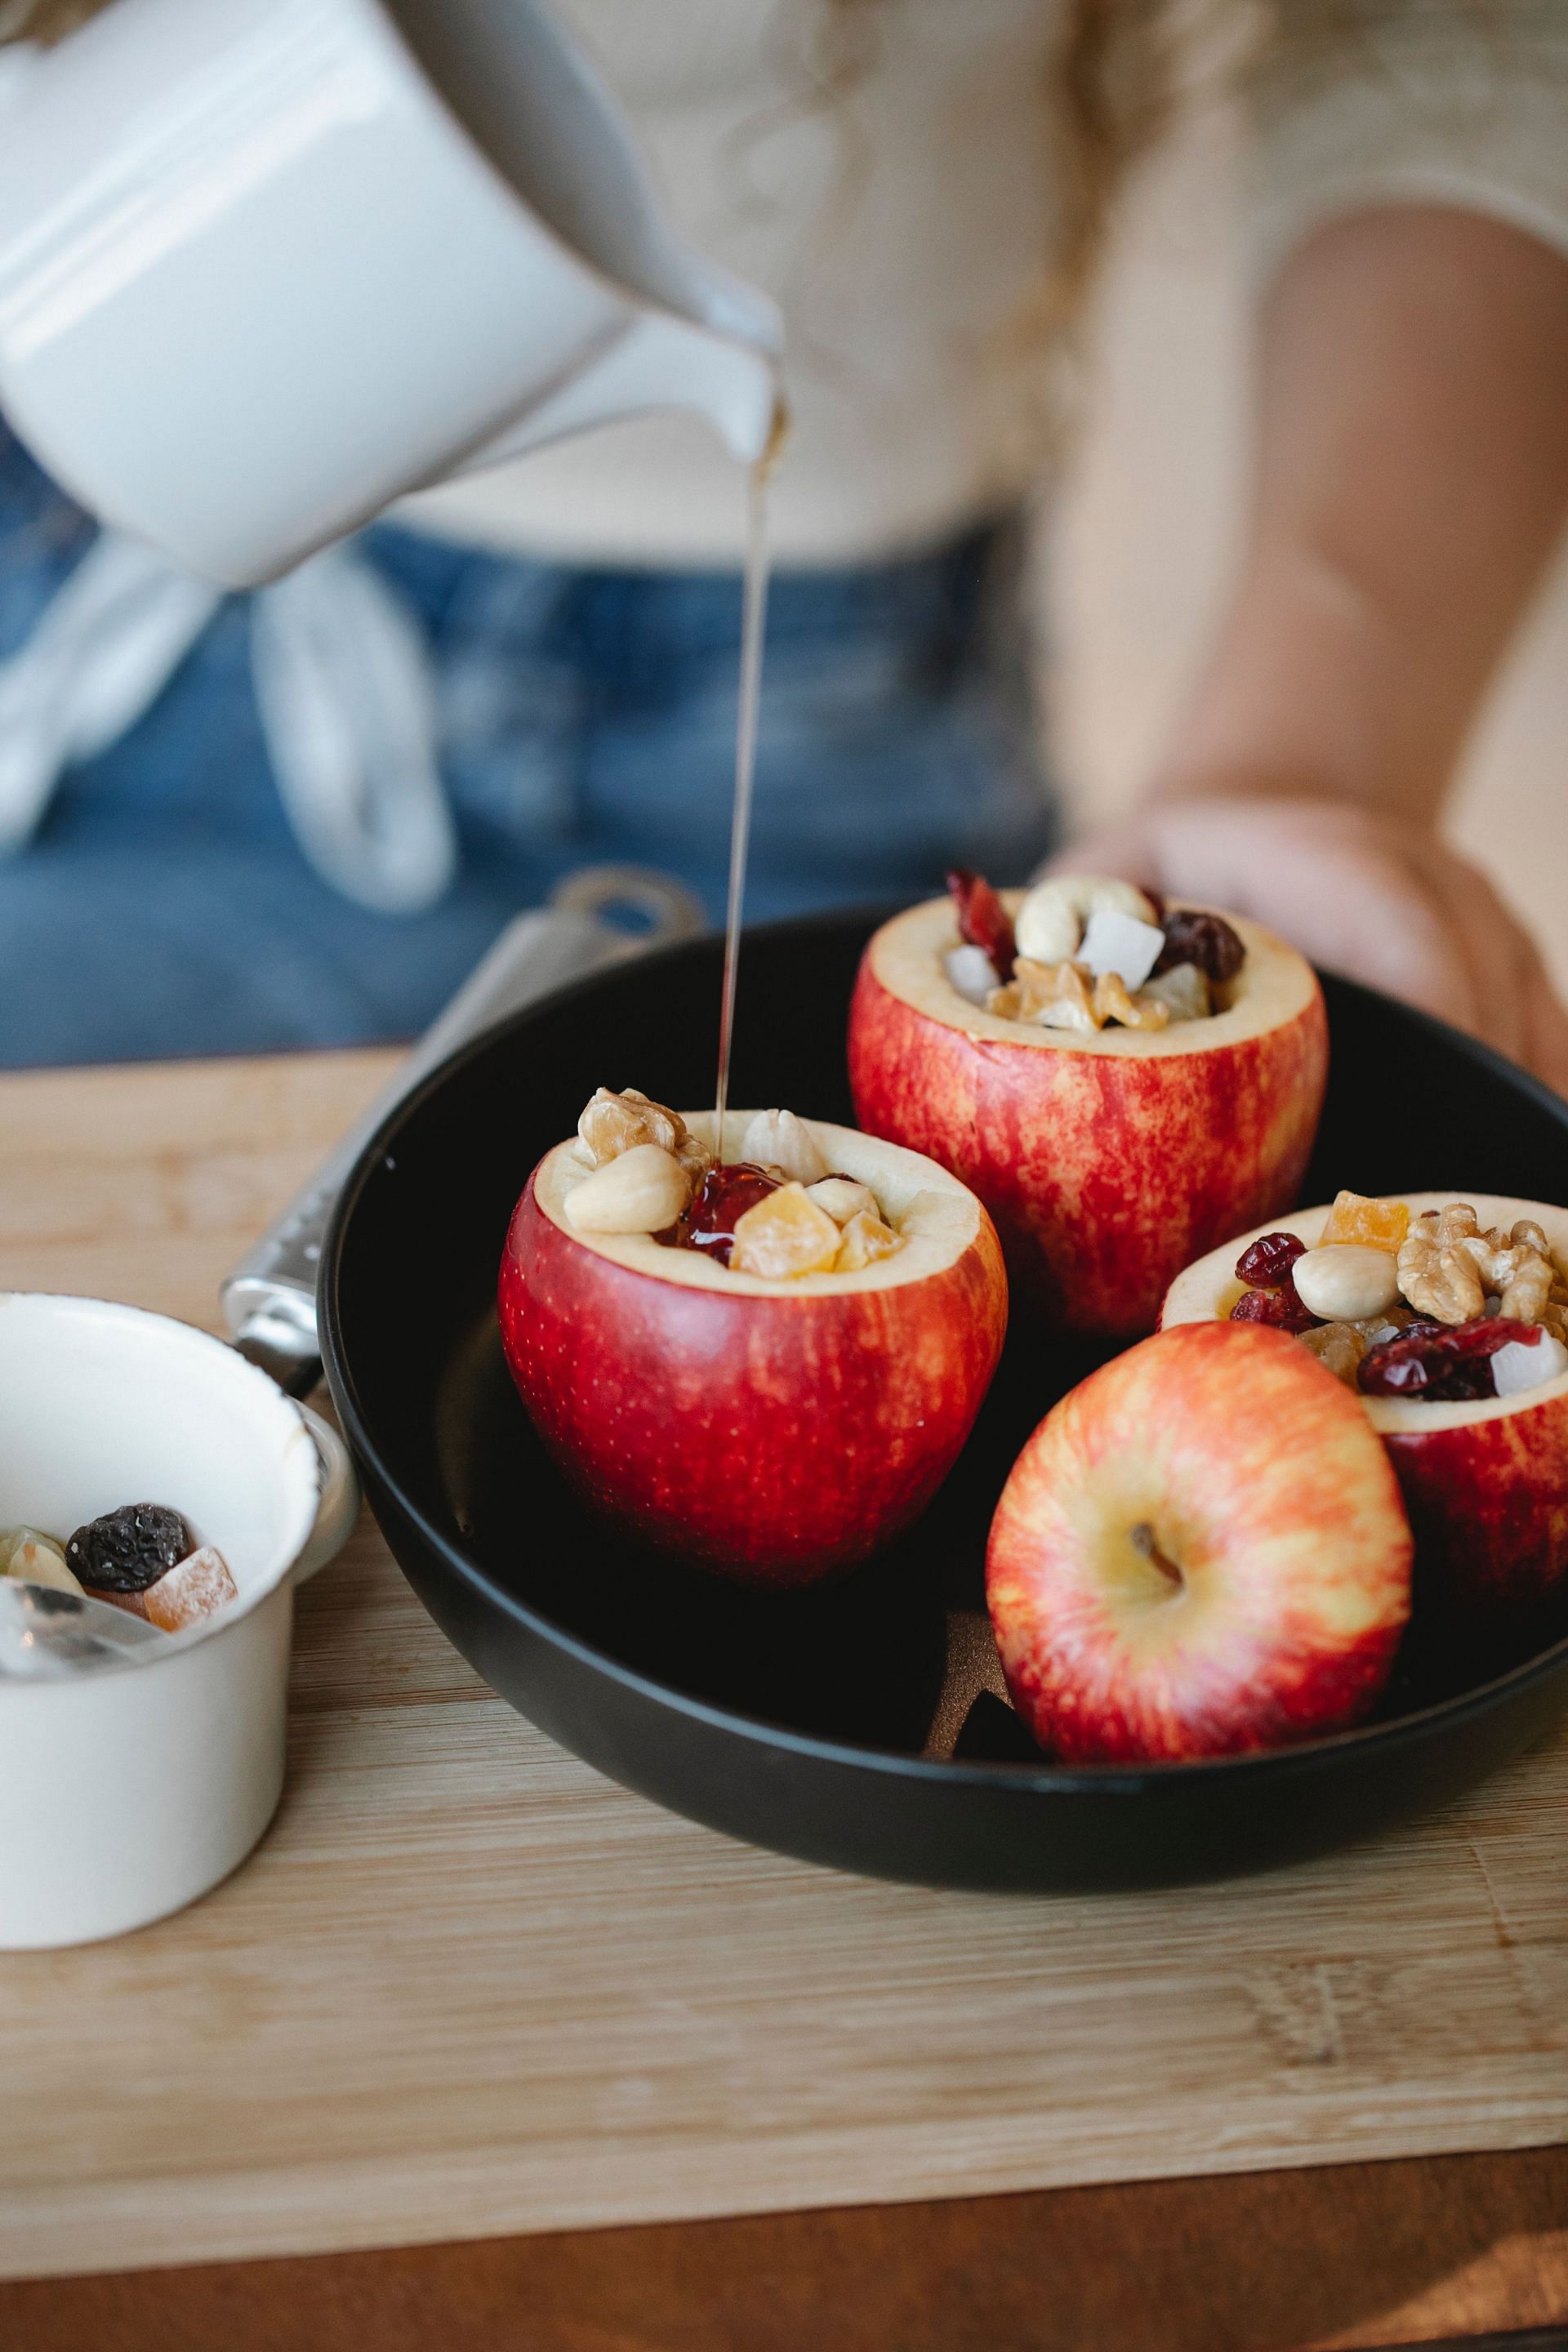 Apples and nuts make a healthy and satisfying snack (Image Via Pexels)